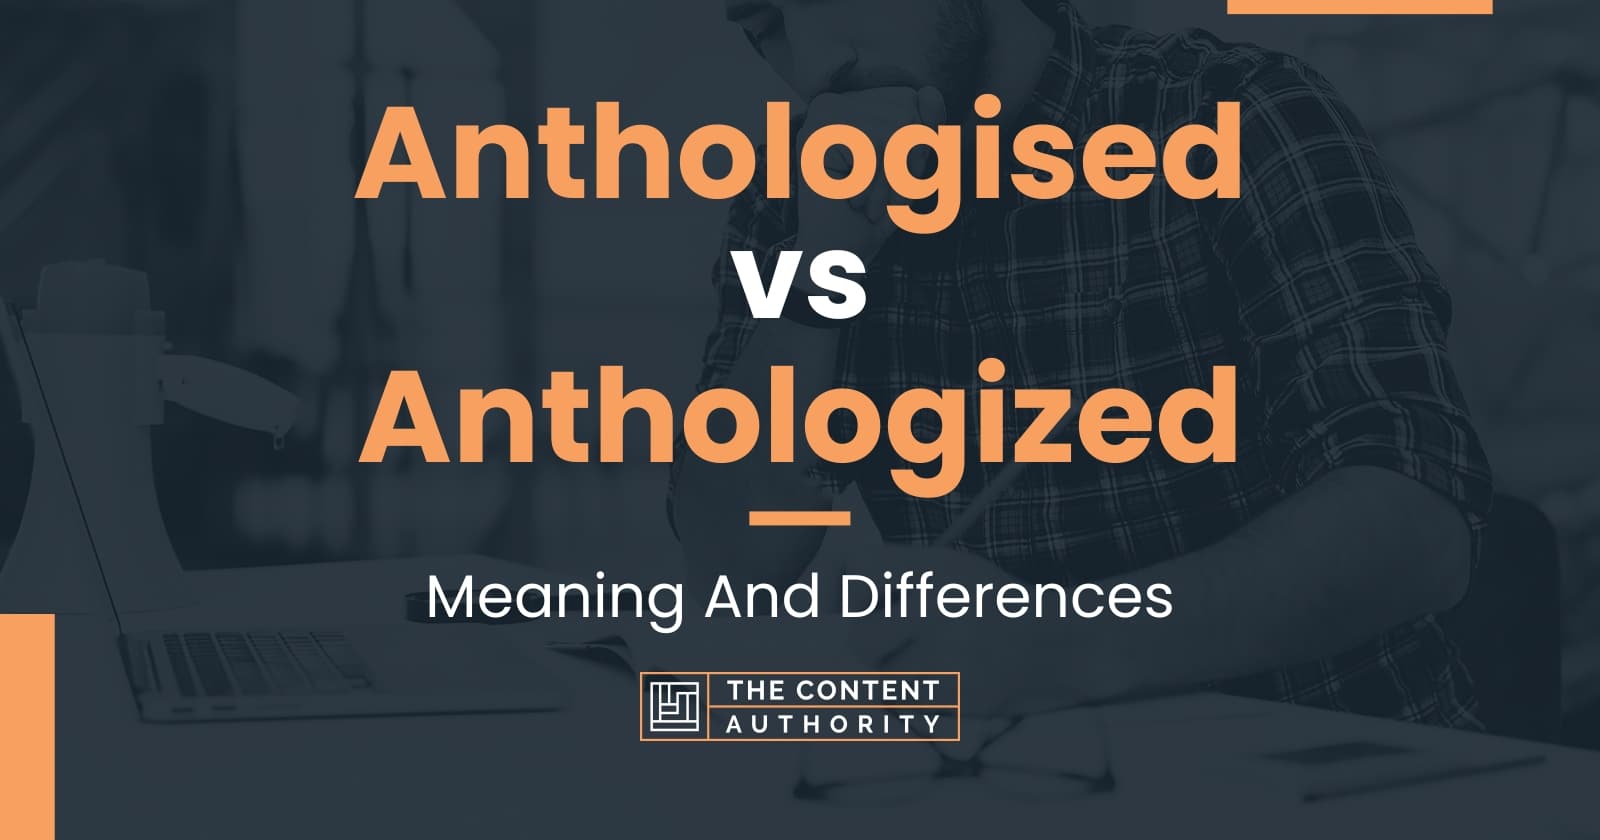 Anthologised vs Anthologized: Meaning And Differences